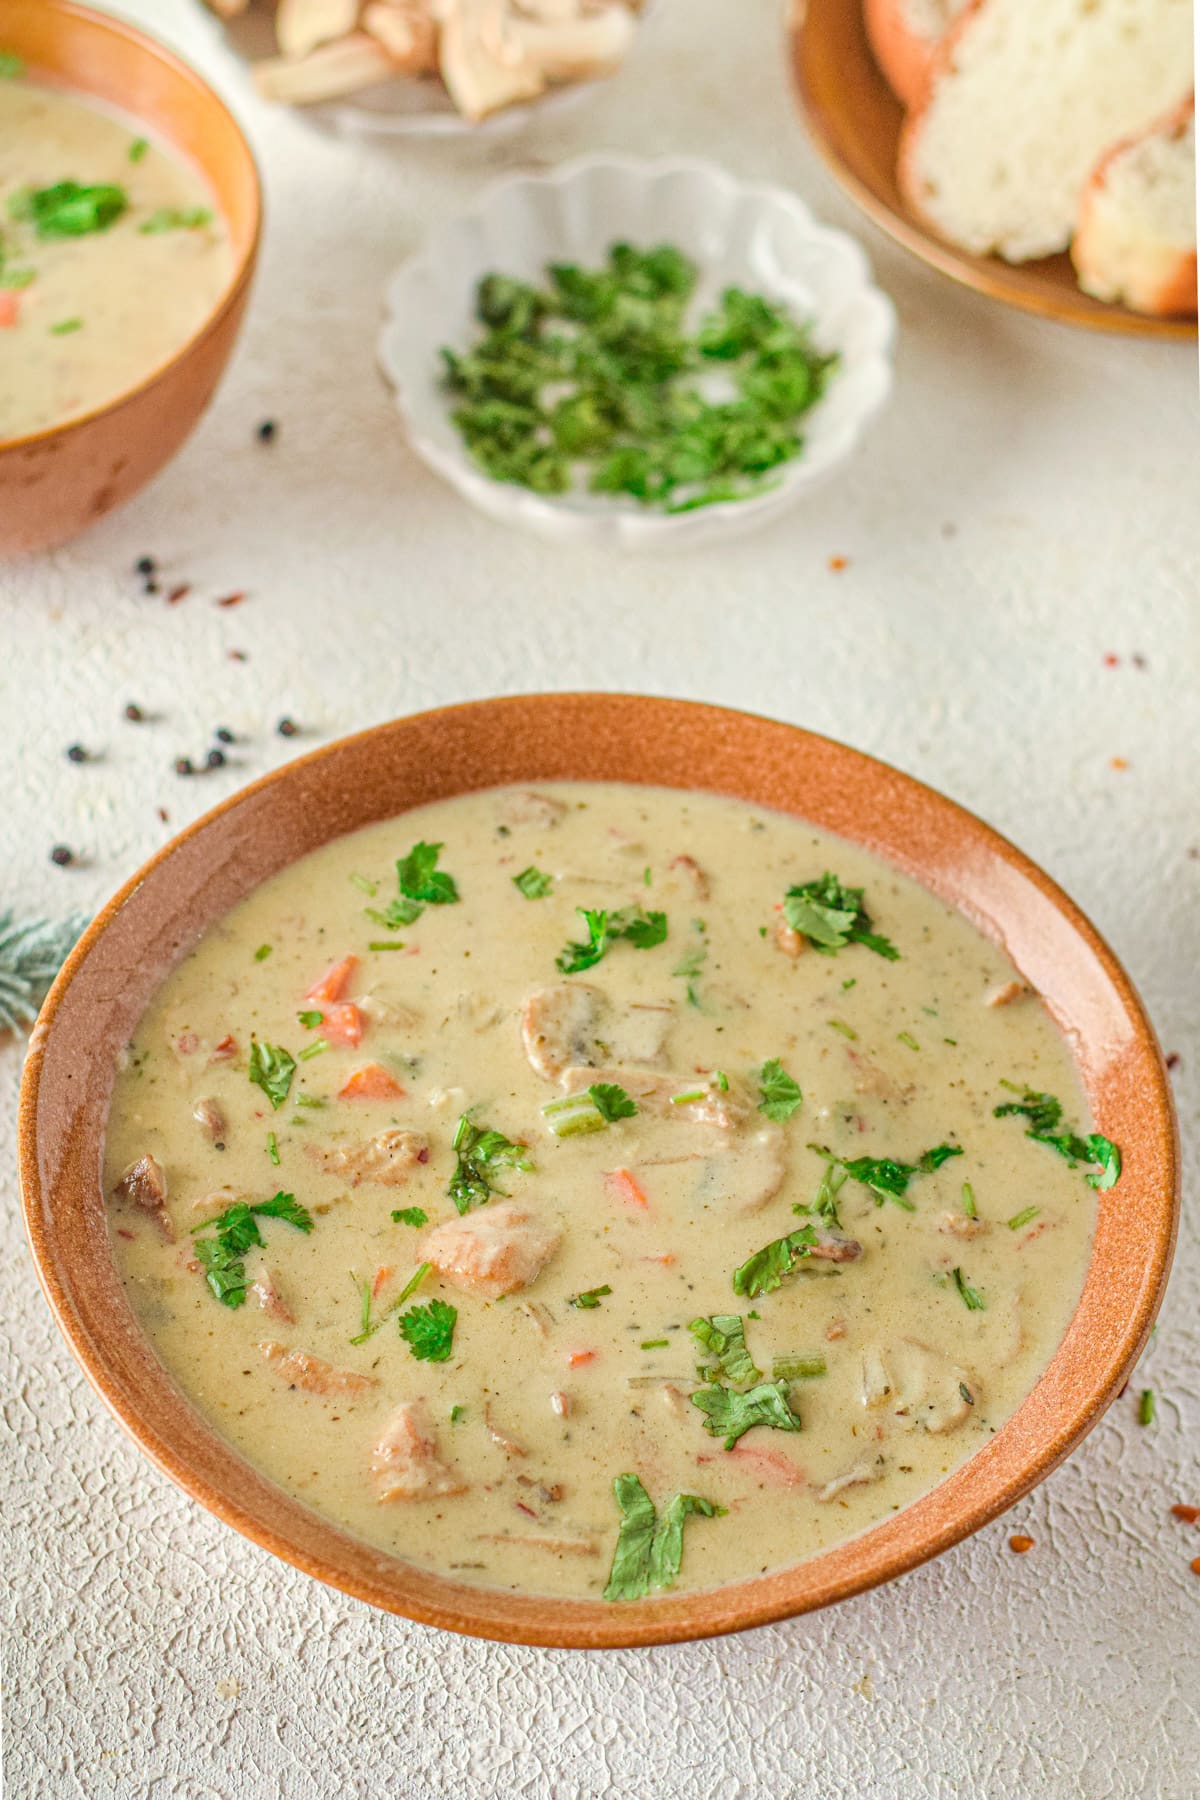 Creamy chicken and mushroom soup in bowl